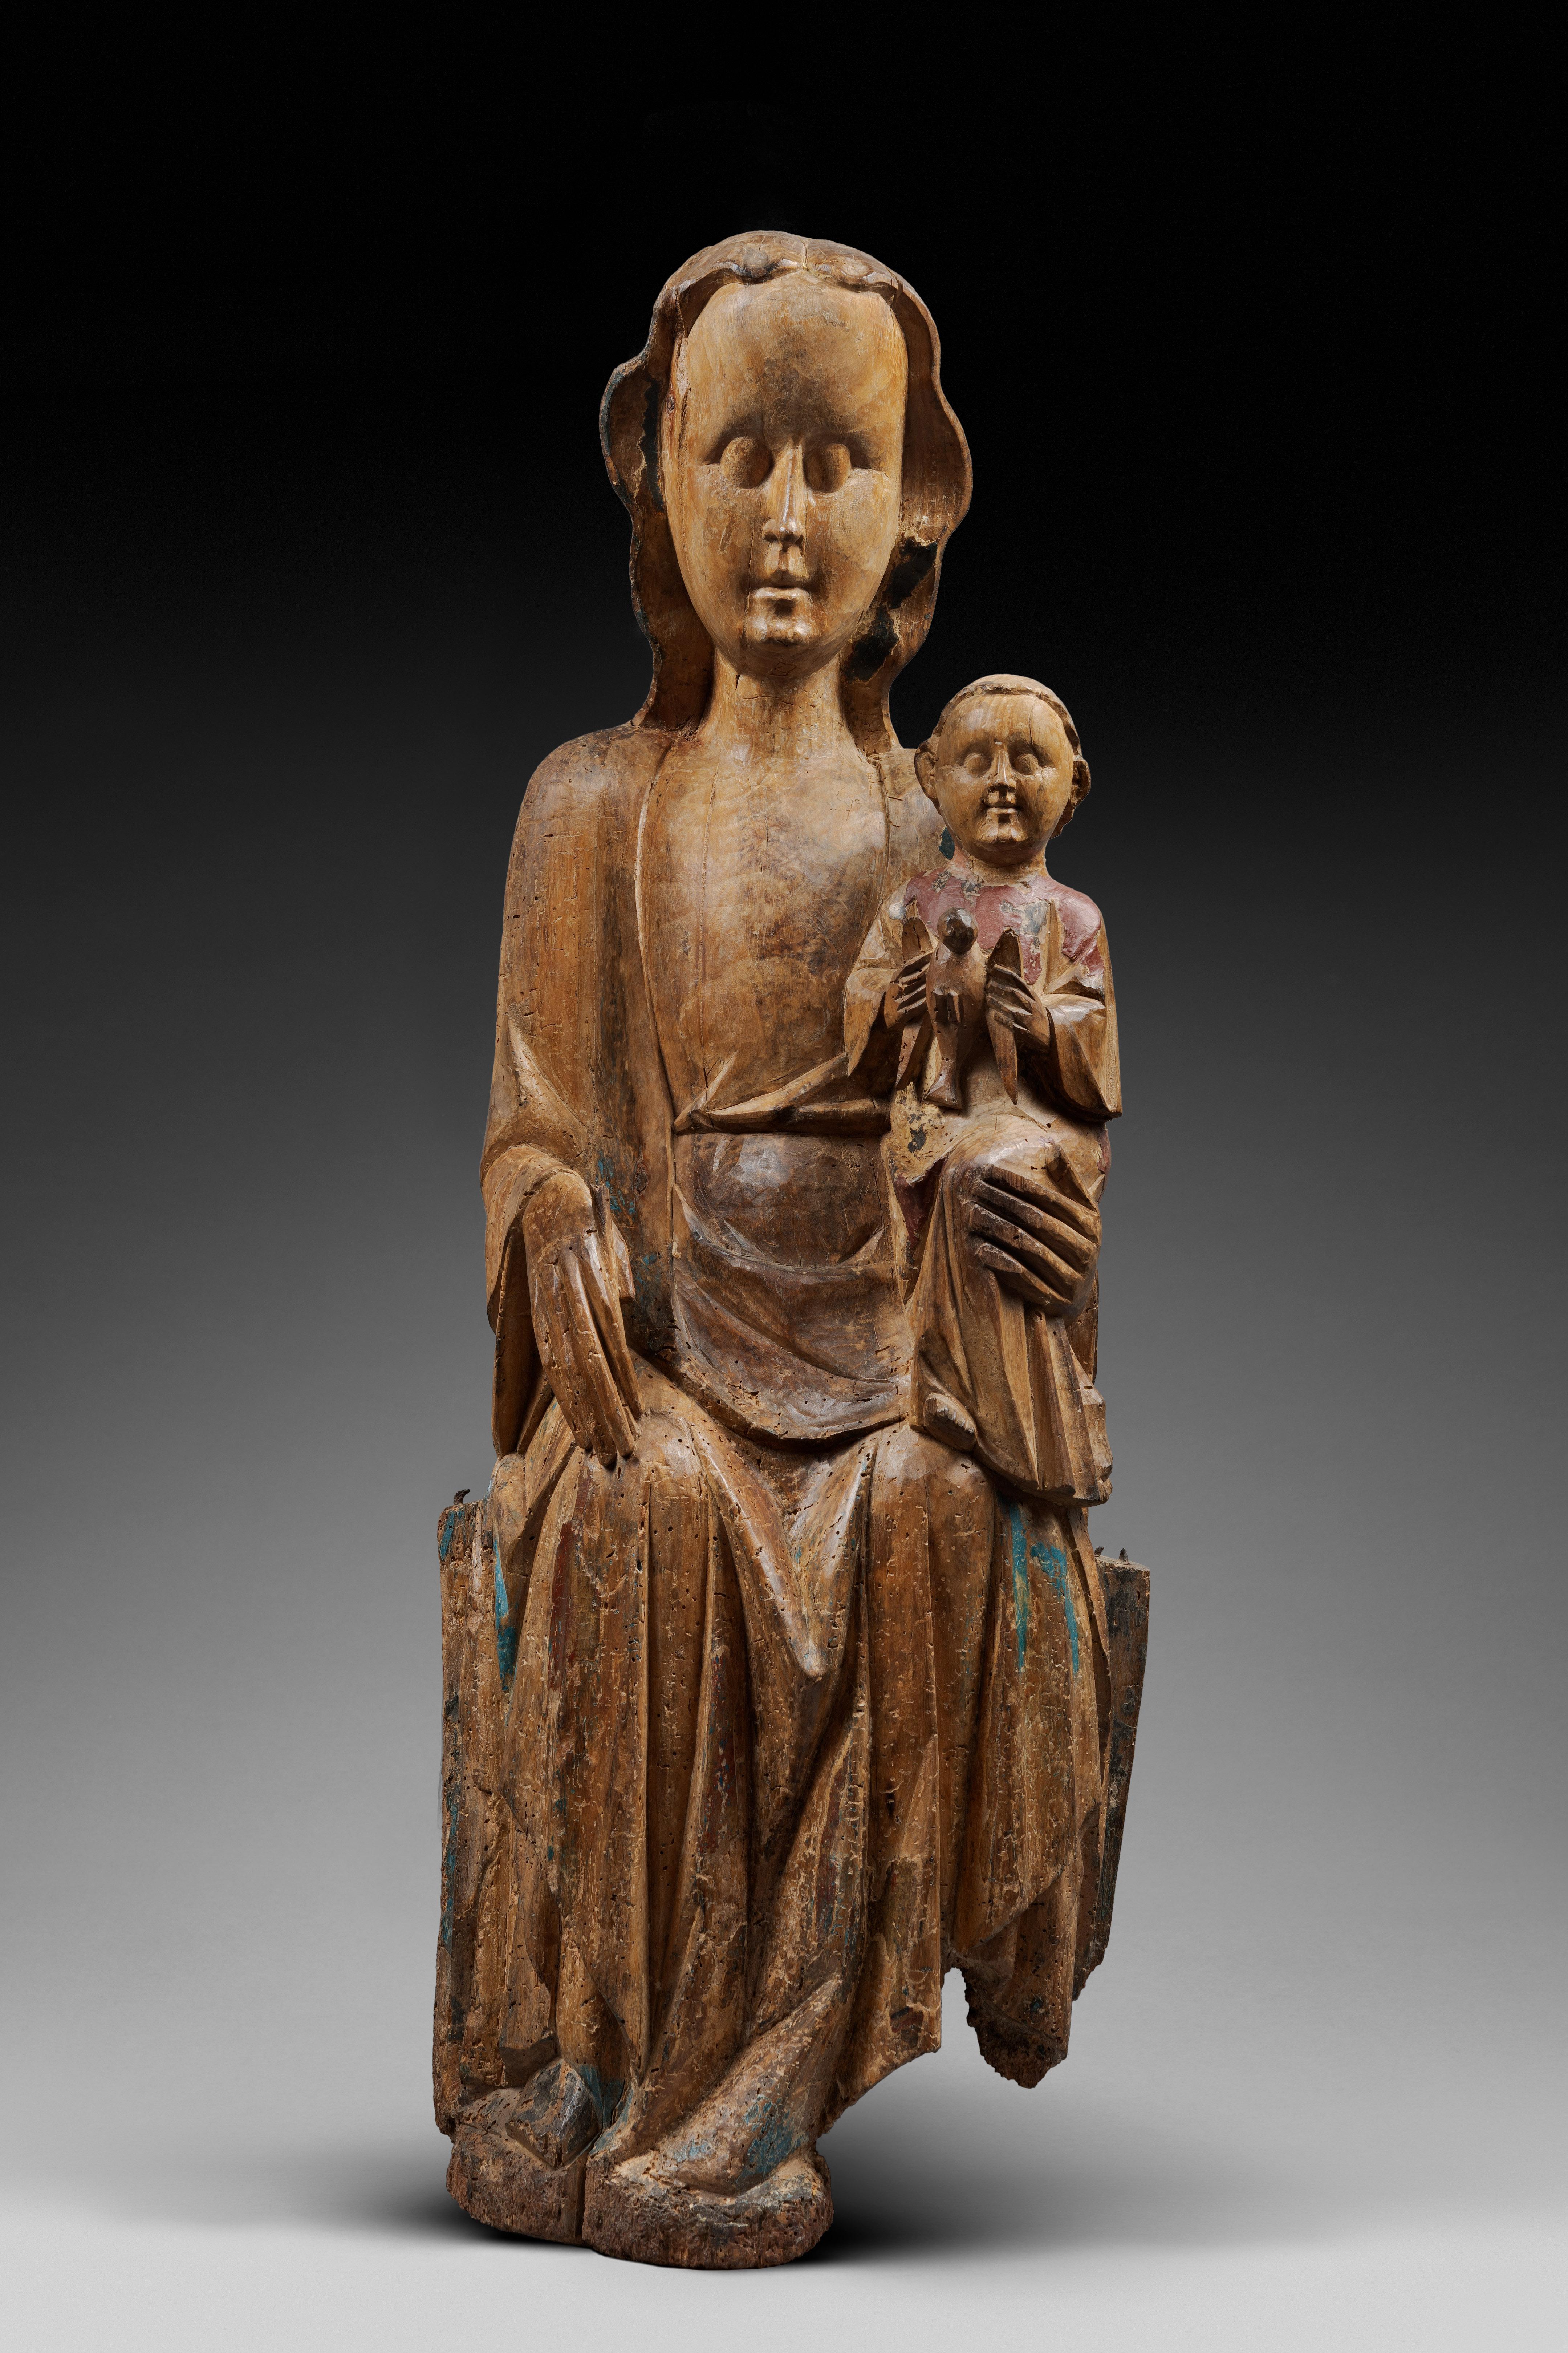 Virgin and child in majesty with a bird


Origin: Southern Germany Or Austria 
Period: Late 13tth - Early 14th Century

Height : 87.5 cm
Length : 32 cm
Depth : 19 cm

Lime wood

Mary is depicted on a throne bench of which we can only see